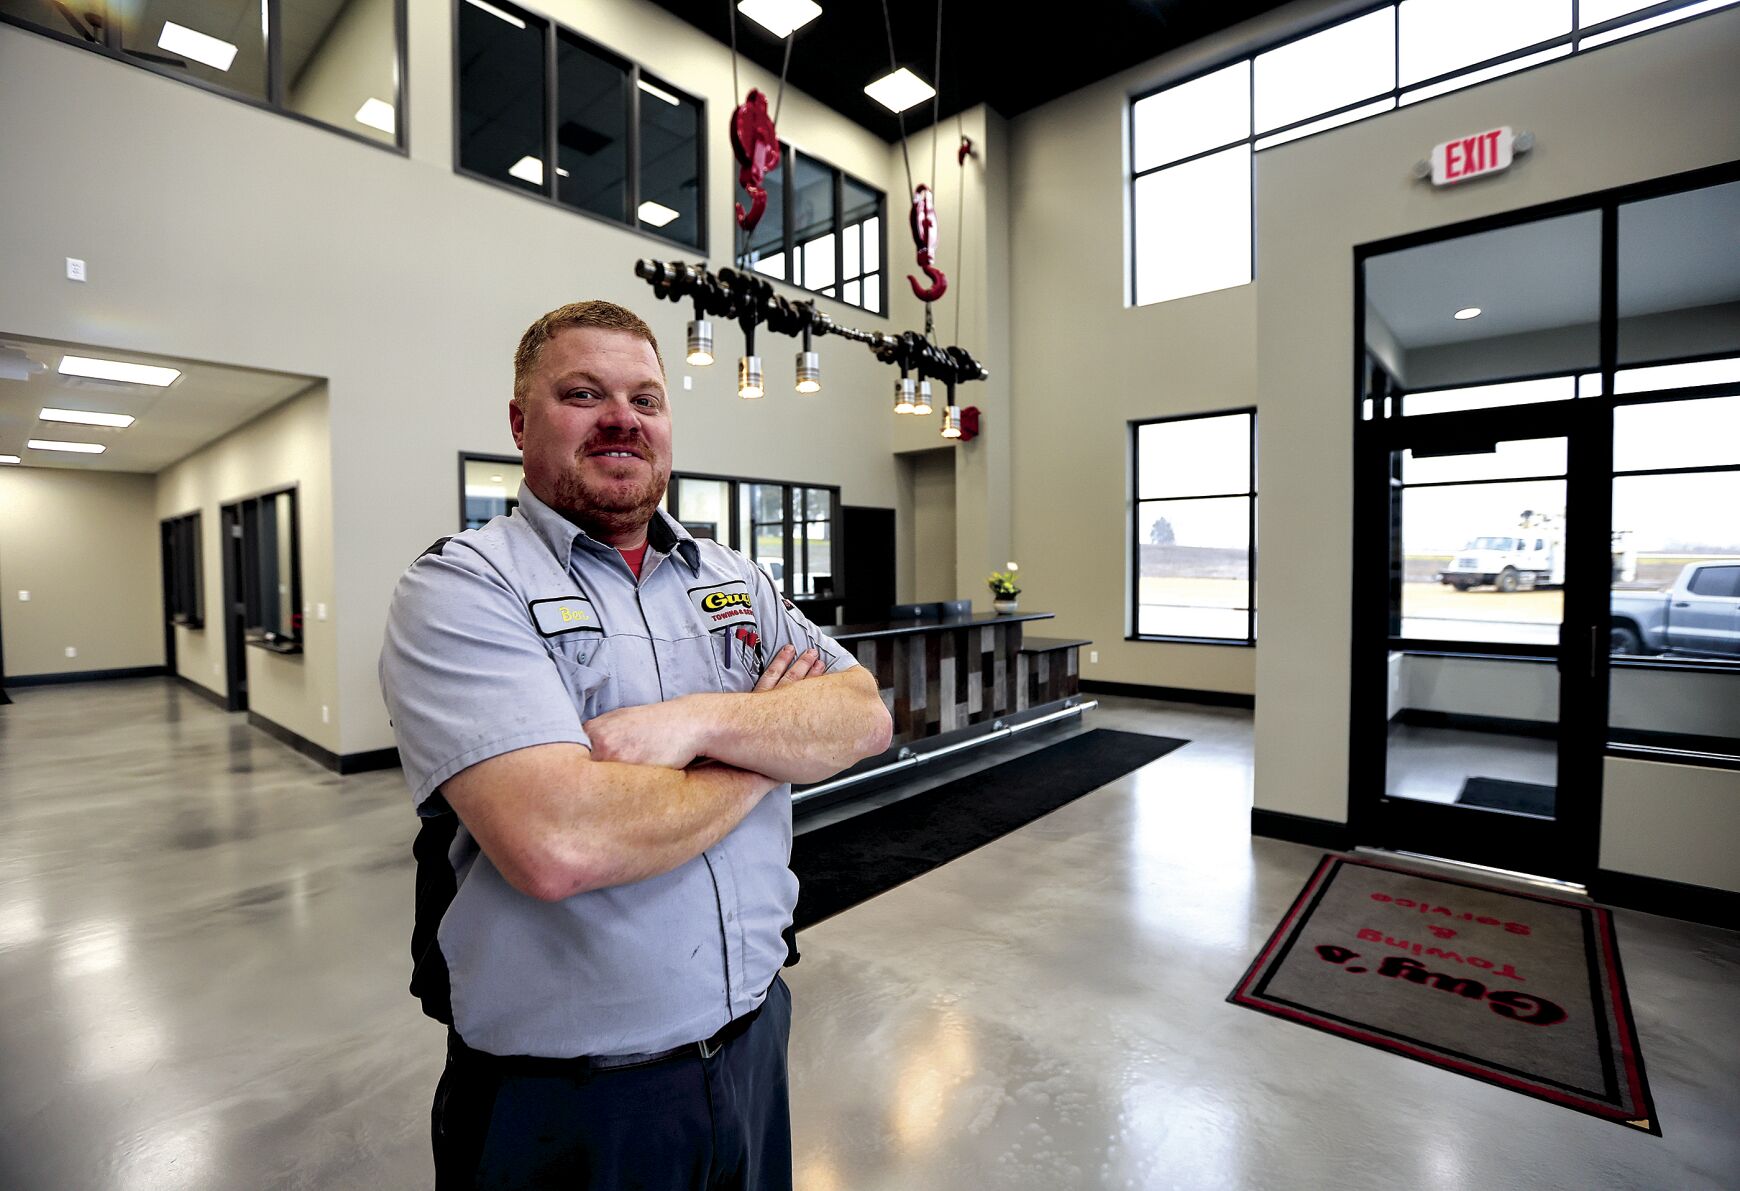 Co-owner Ben Richard with Guy’s Towing & Service located in Galena, Ill., on Friday, March 8, 2024. The longtime family business has opened a new 21,000-square-foot building in Galena, Ill. specializing in repairs/maintenance for trucks, trailers and heavy machinery.    PHOTO CREDIT: Dave Kettering